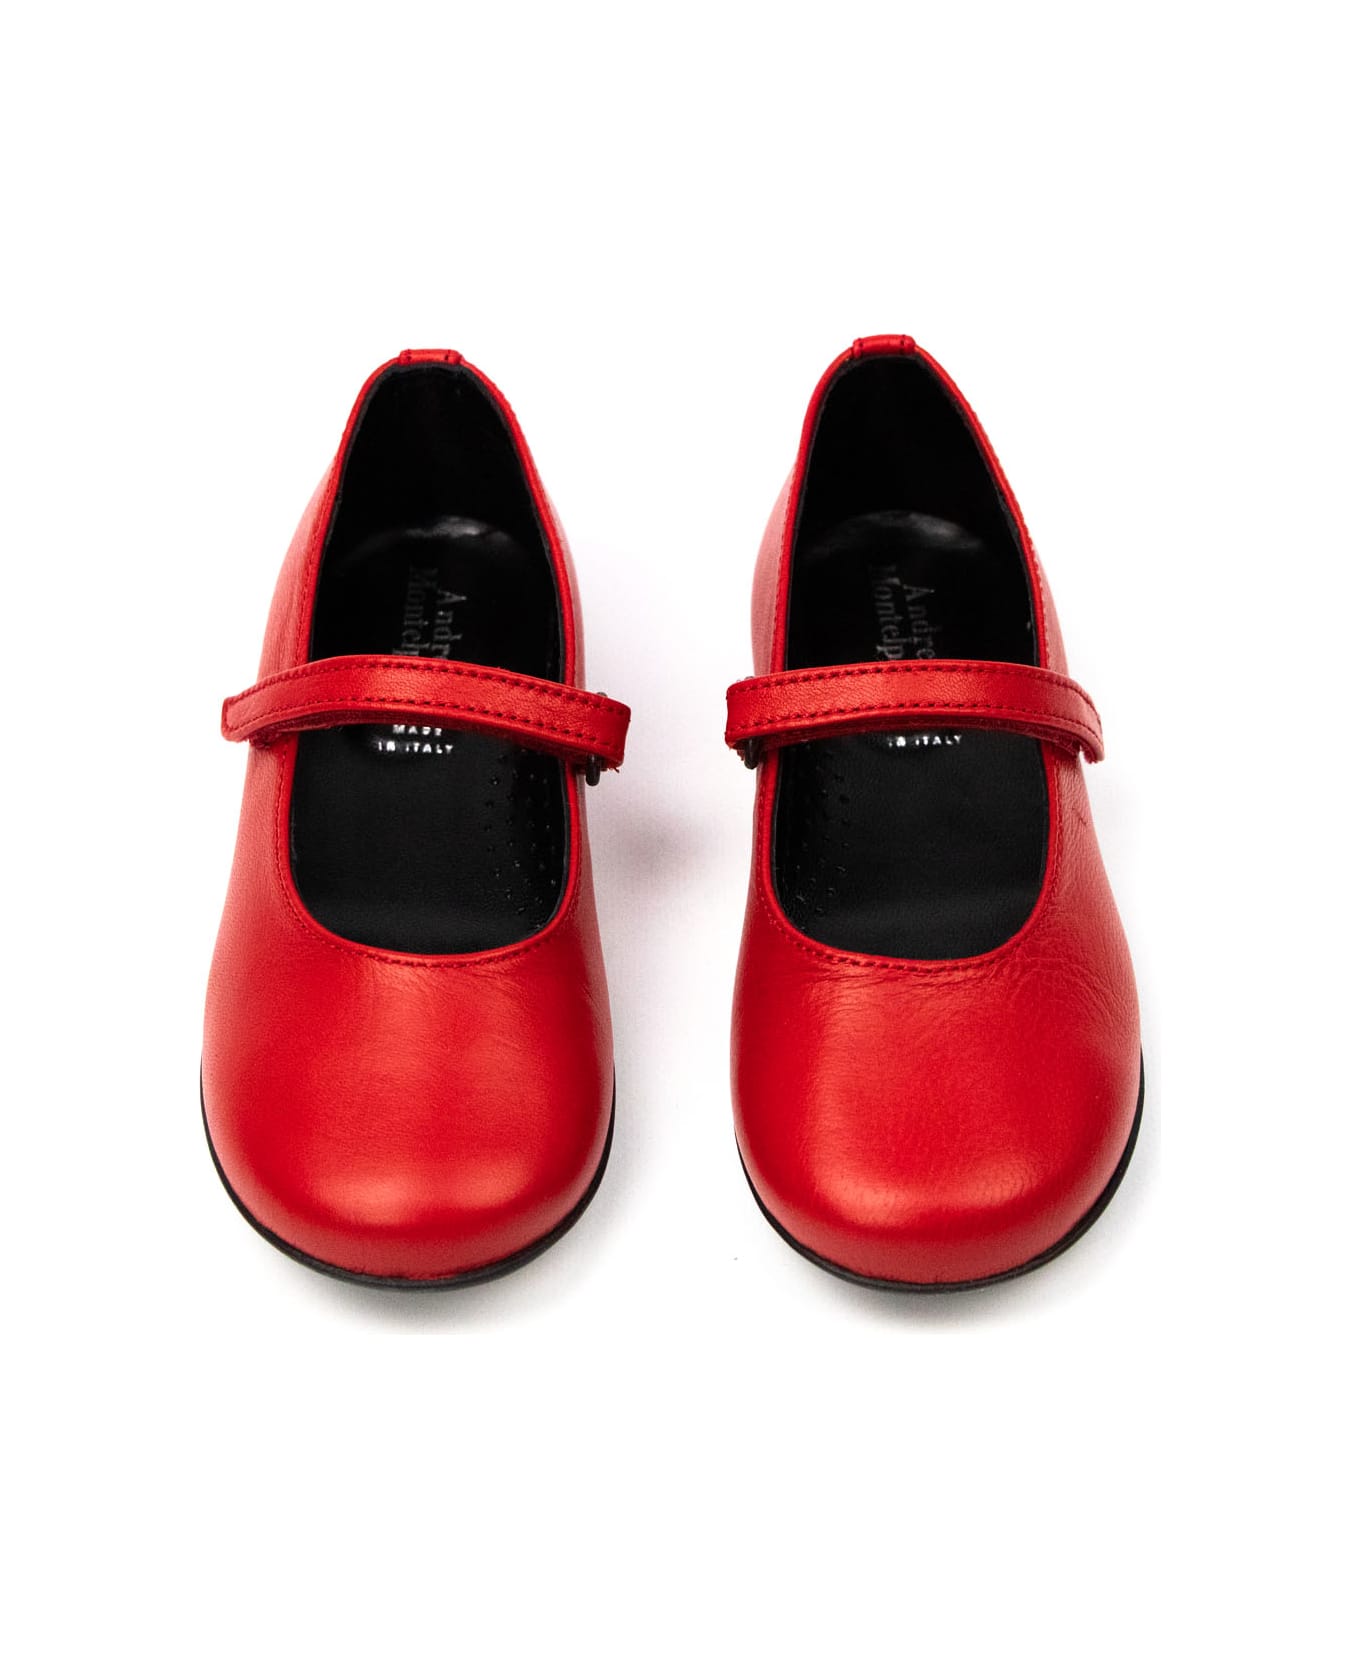 Andrea Montelpare Leather Shoes - Red シューズ